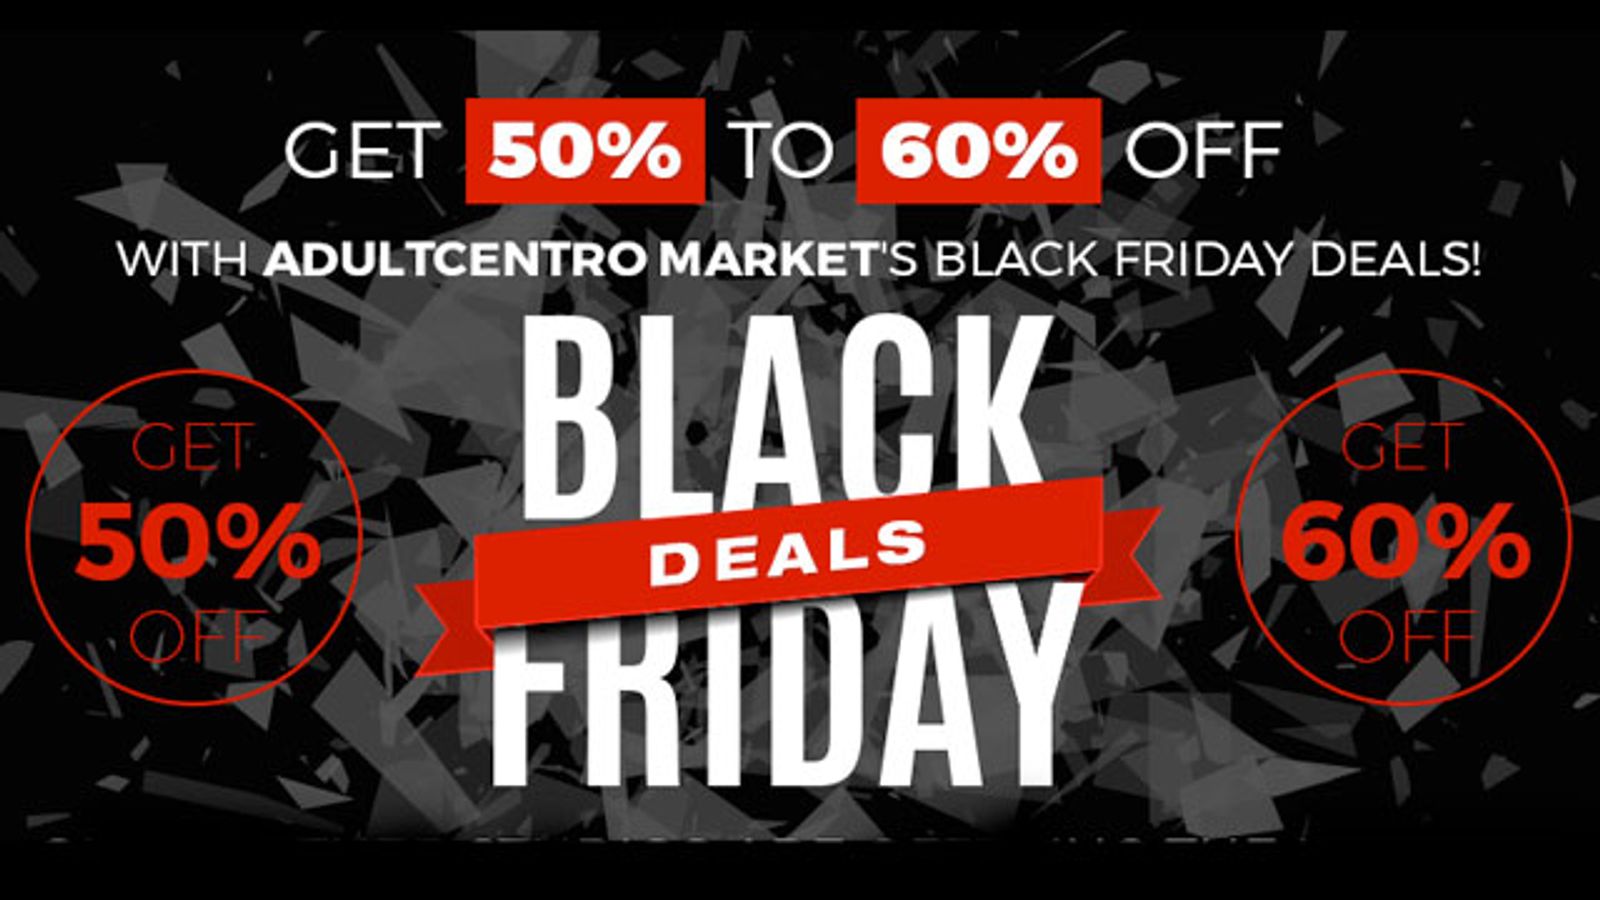 AdultCentro Market Offers Black Friday Content Sale